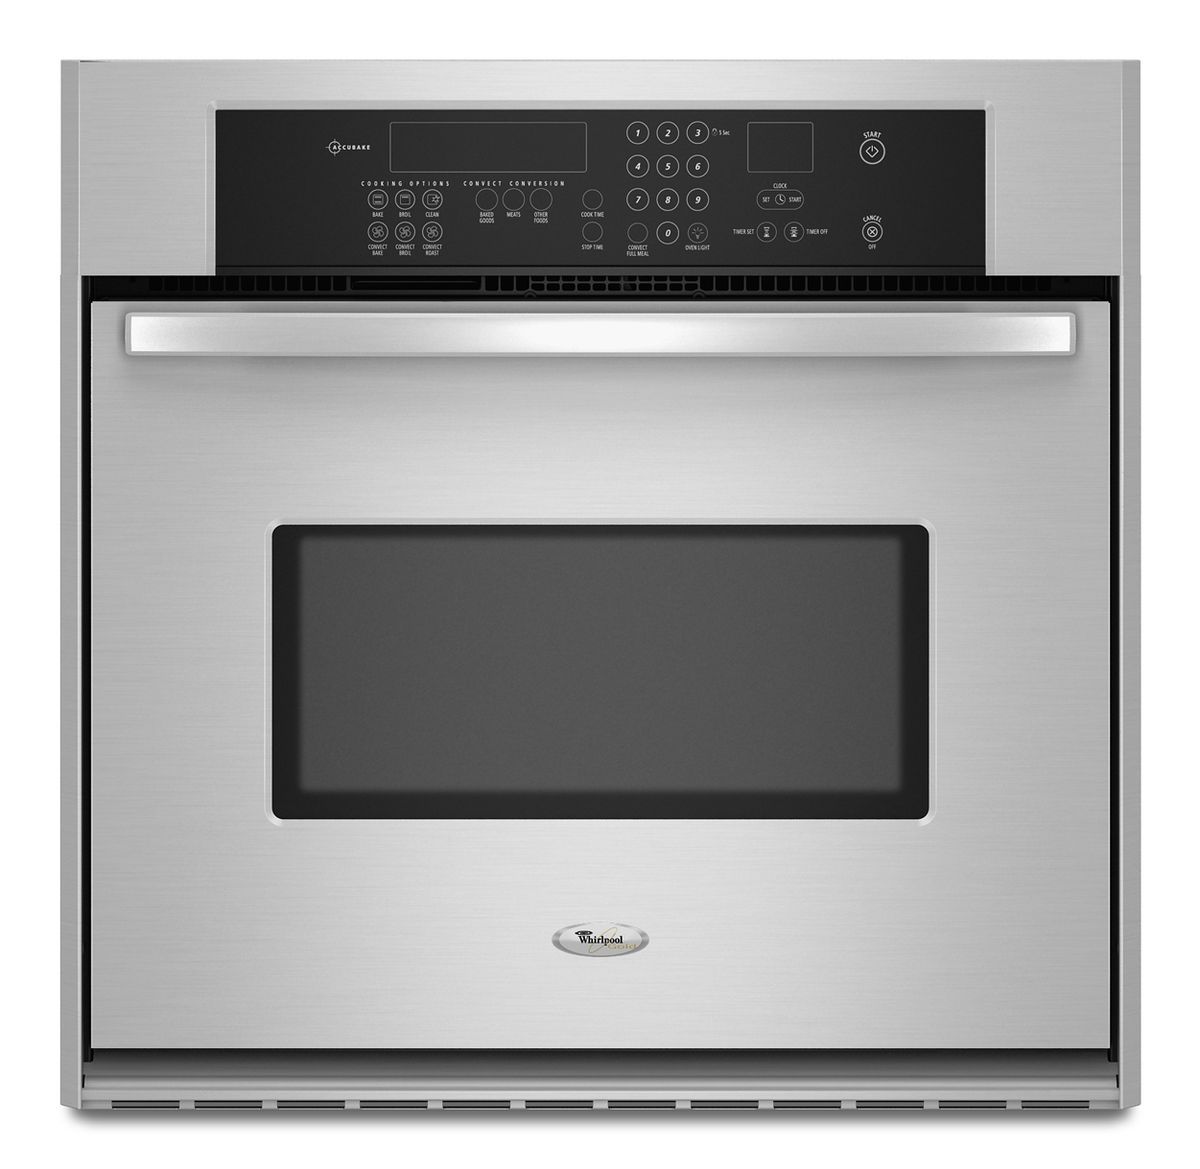 Whirlpool 30 Convection Wall Oven Stainless Steel Self Cleaning